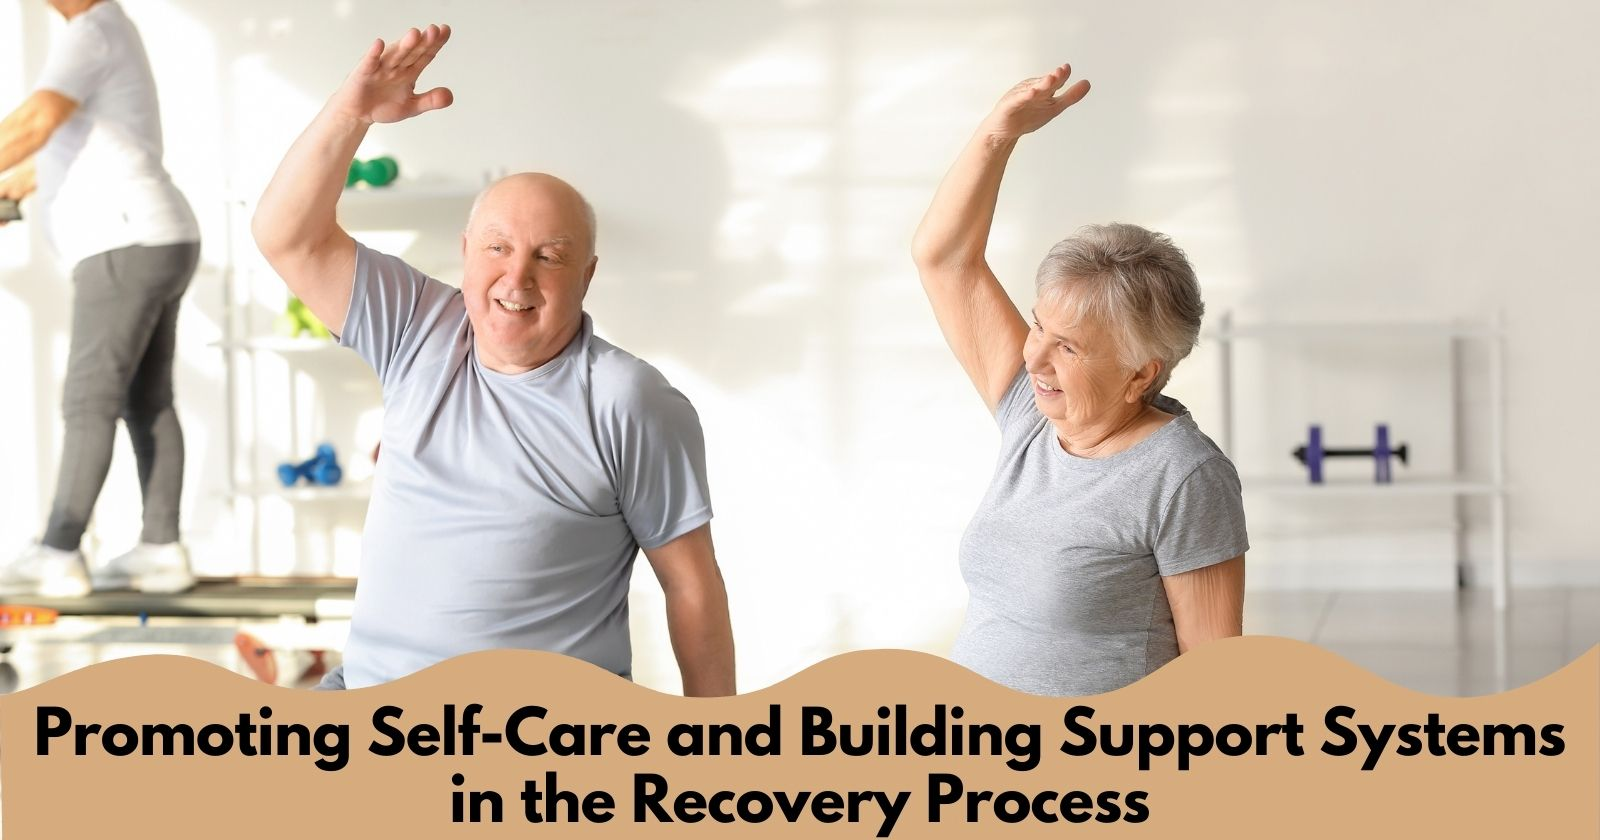 Self-Care and Support Systems in Recovery
Two old man and women doing exercise with a text box " Promoting self care and building support system in recovery process"